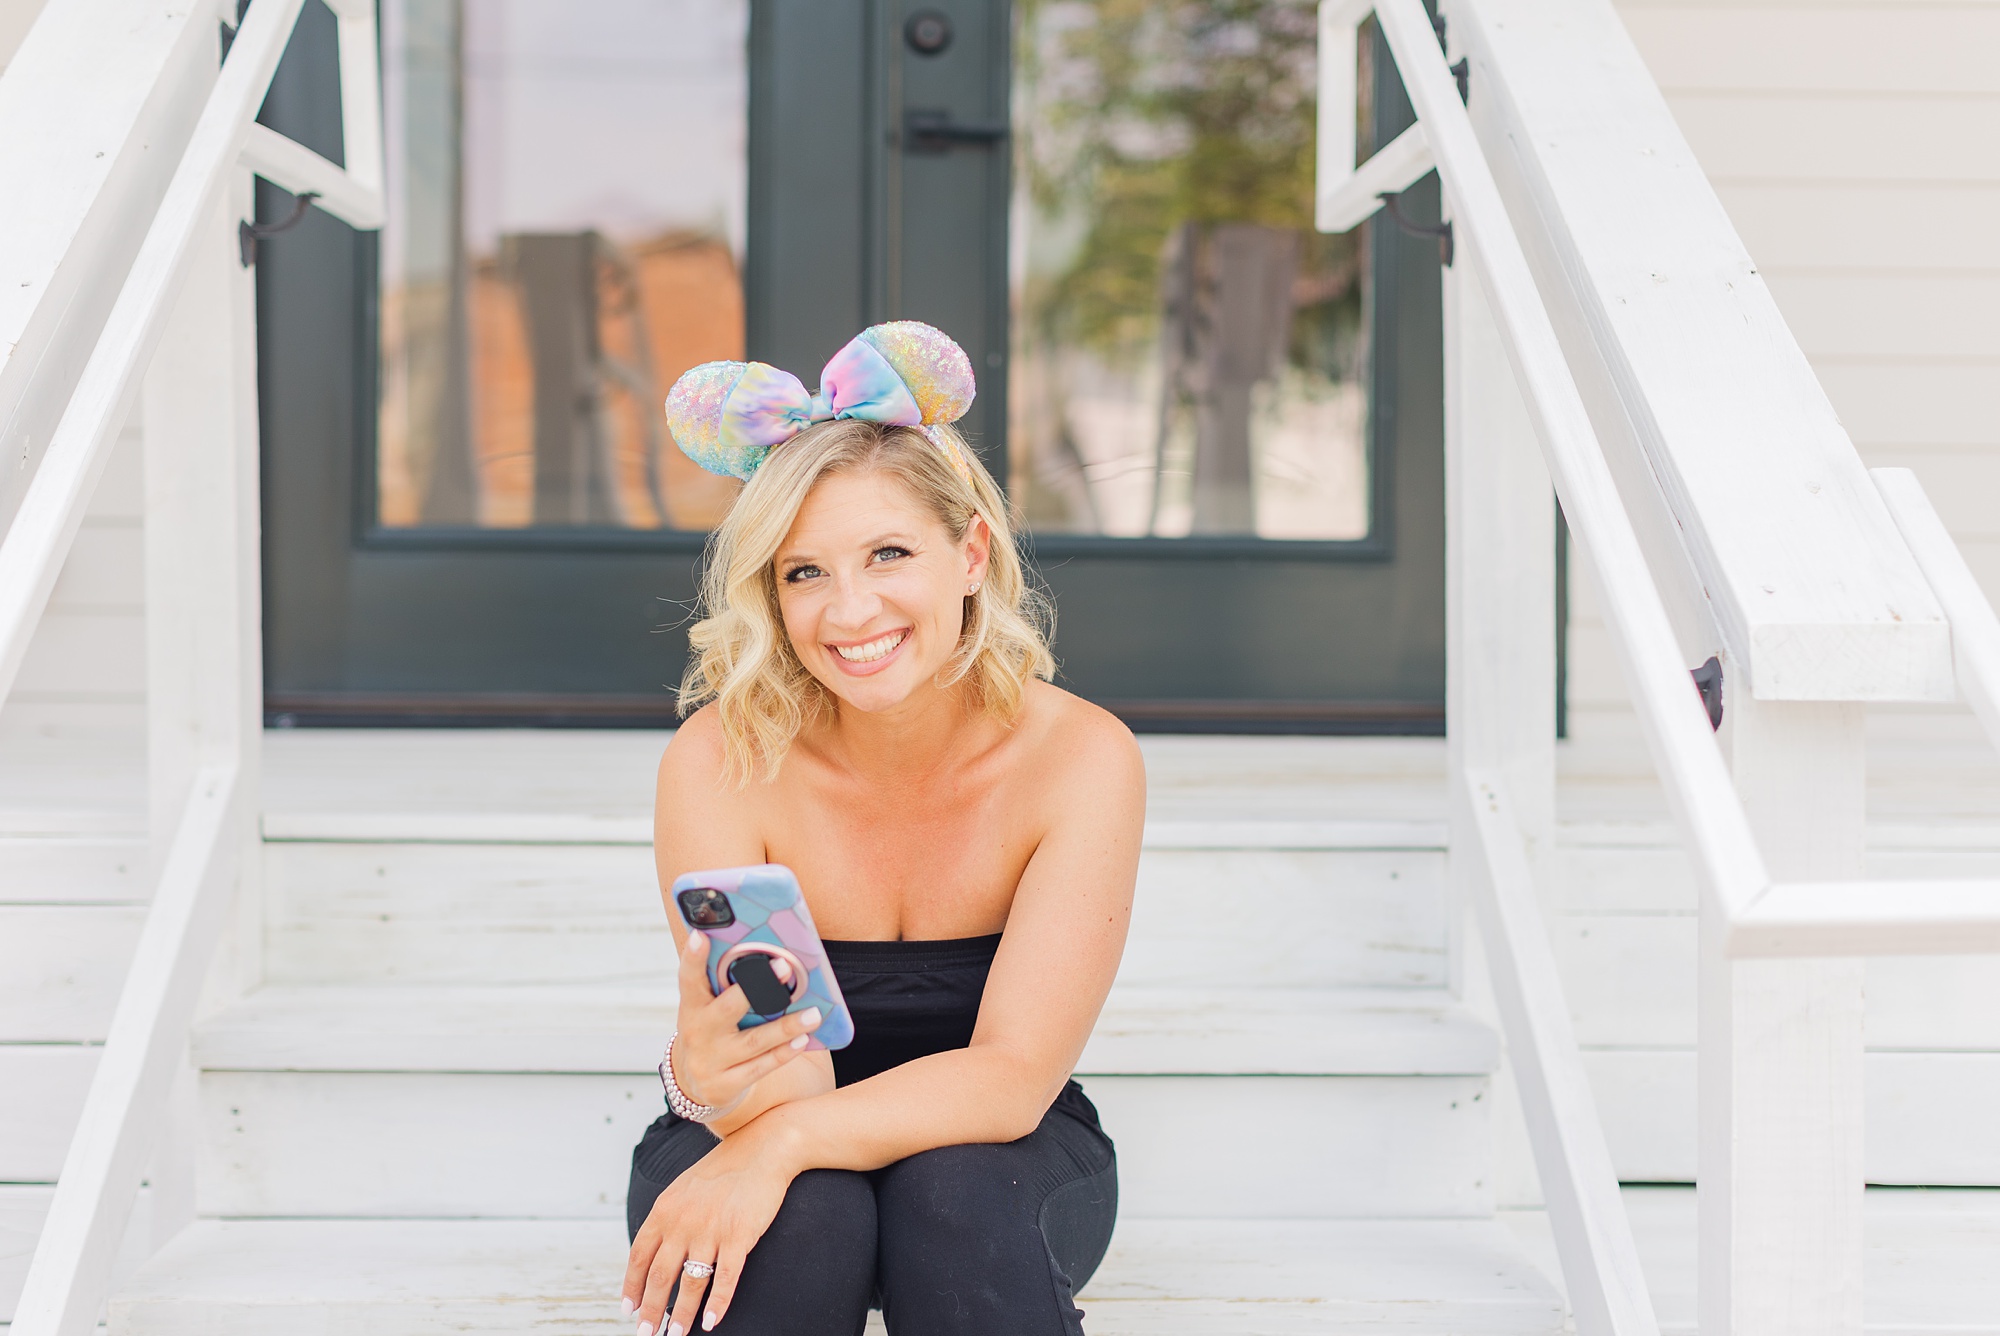 Disney trip planner sits on steps at OfNote during branding photos